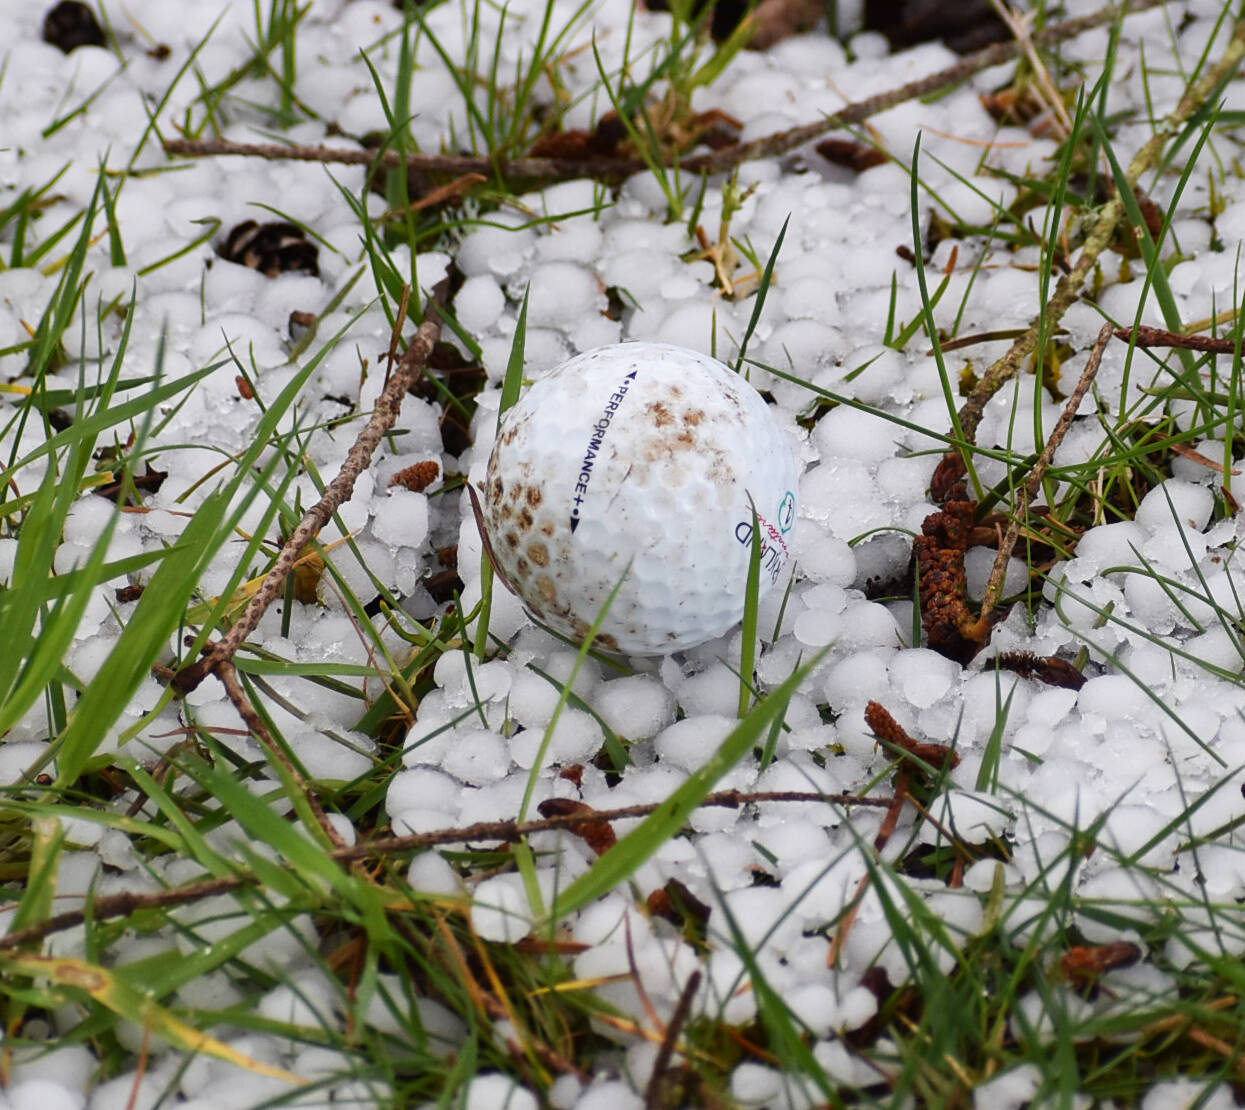 Several golf balls became stuck in puddles, sheets of ice and more.